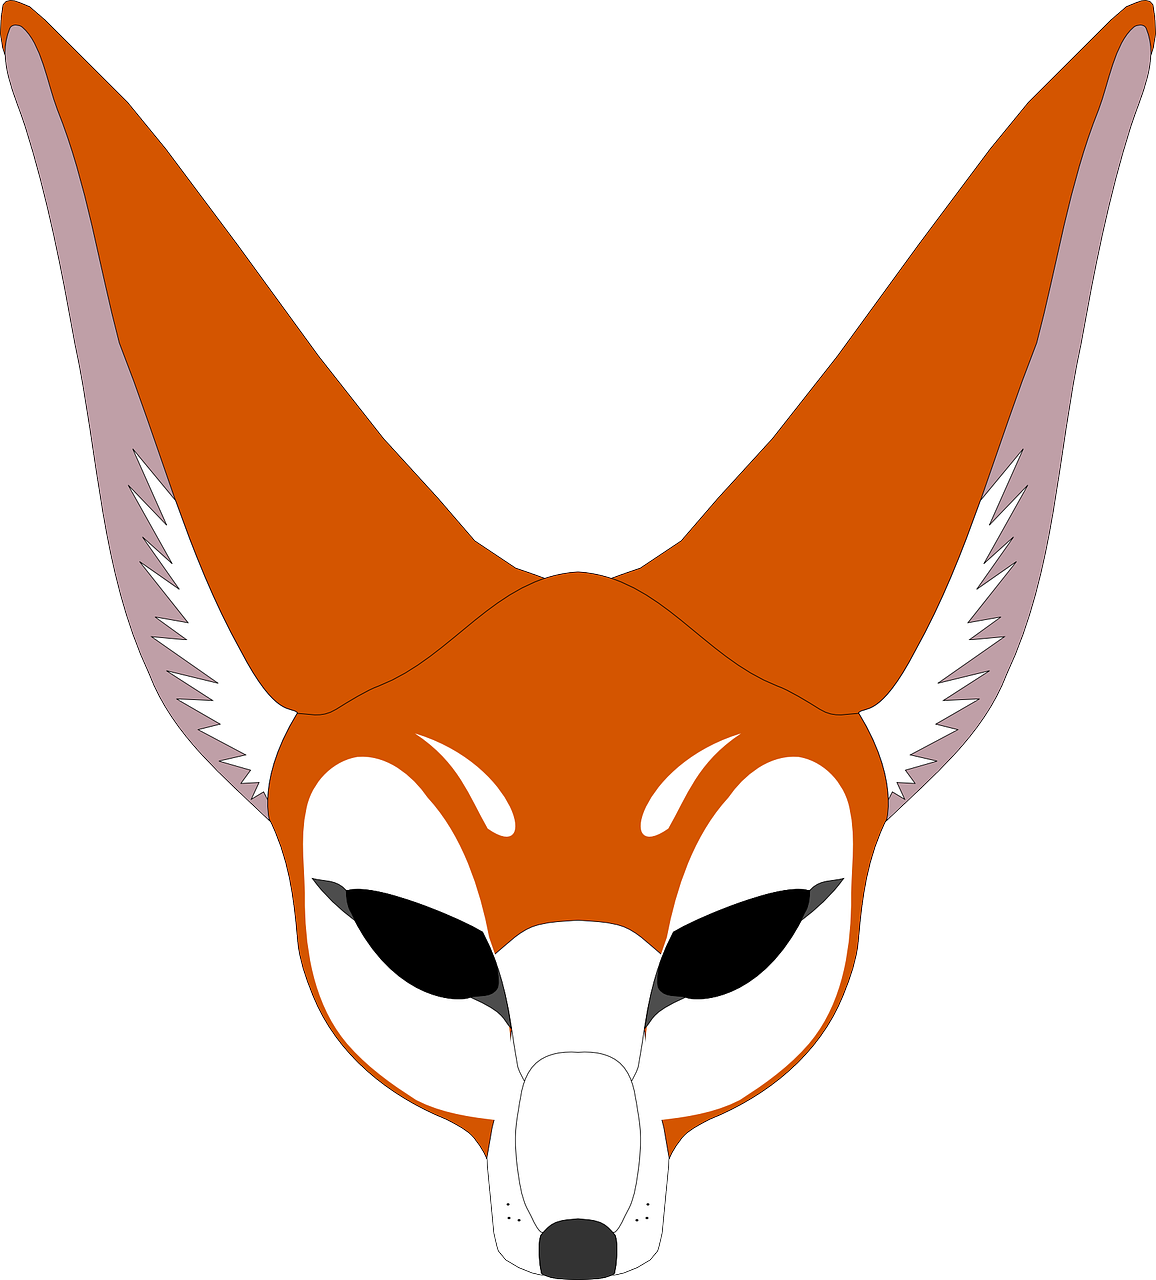 Coyote Vector Download PNG Image